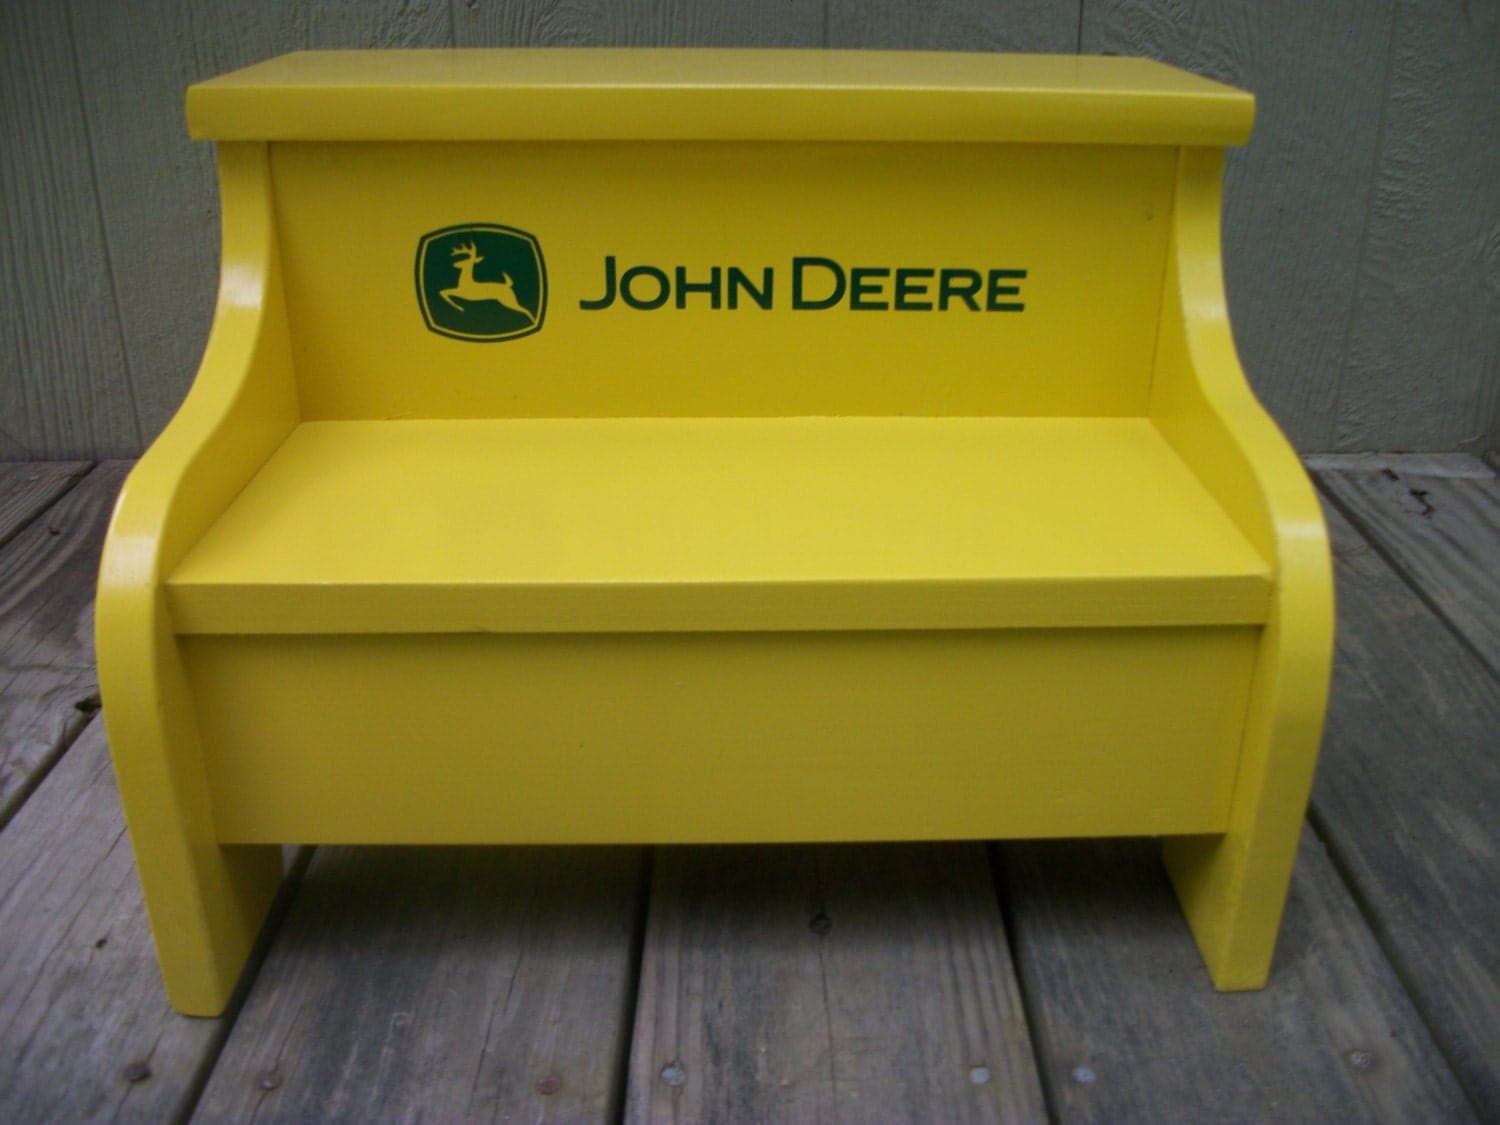 Best John Deere Step Stool in the year 2023 The ultimate guide 